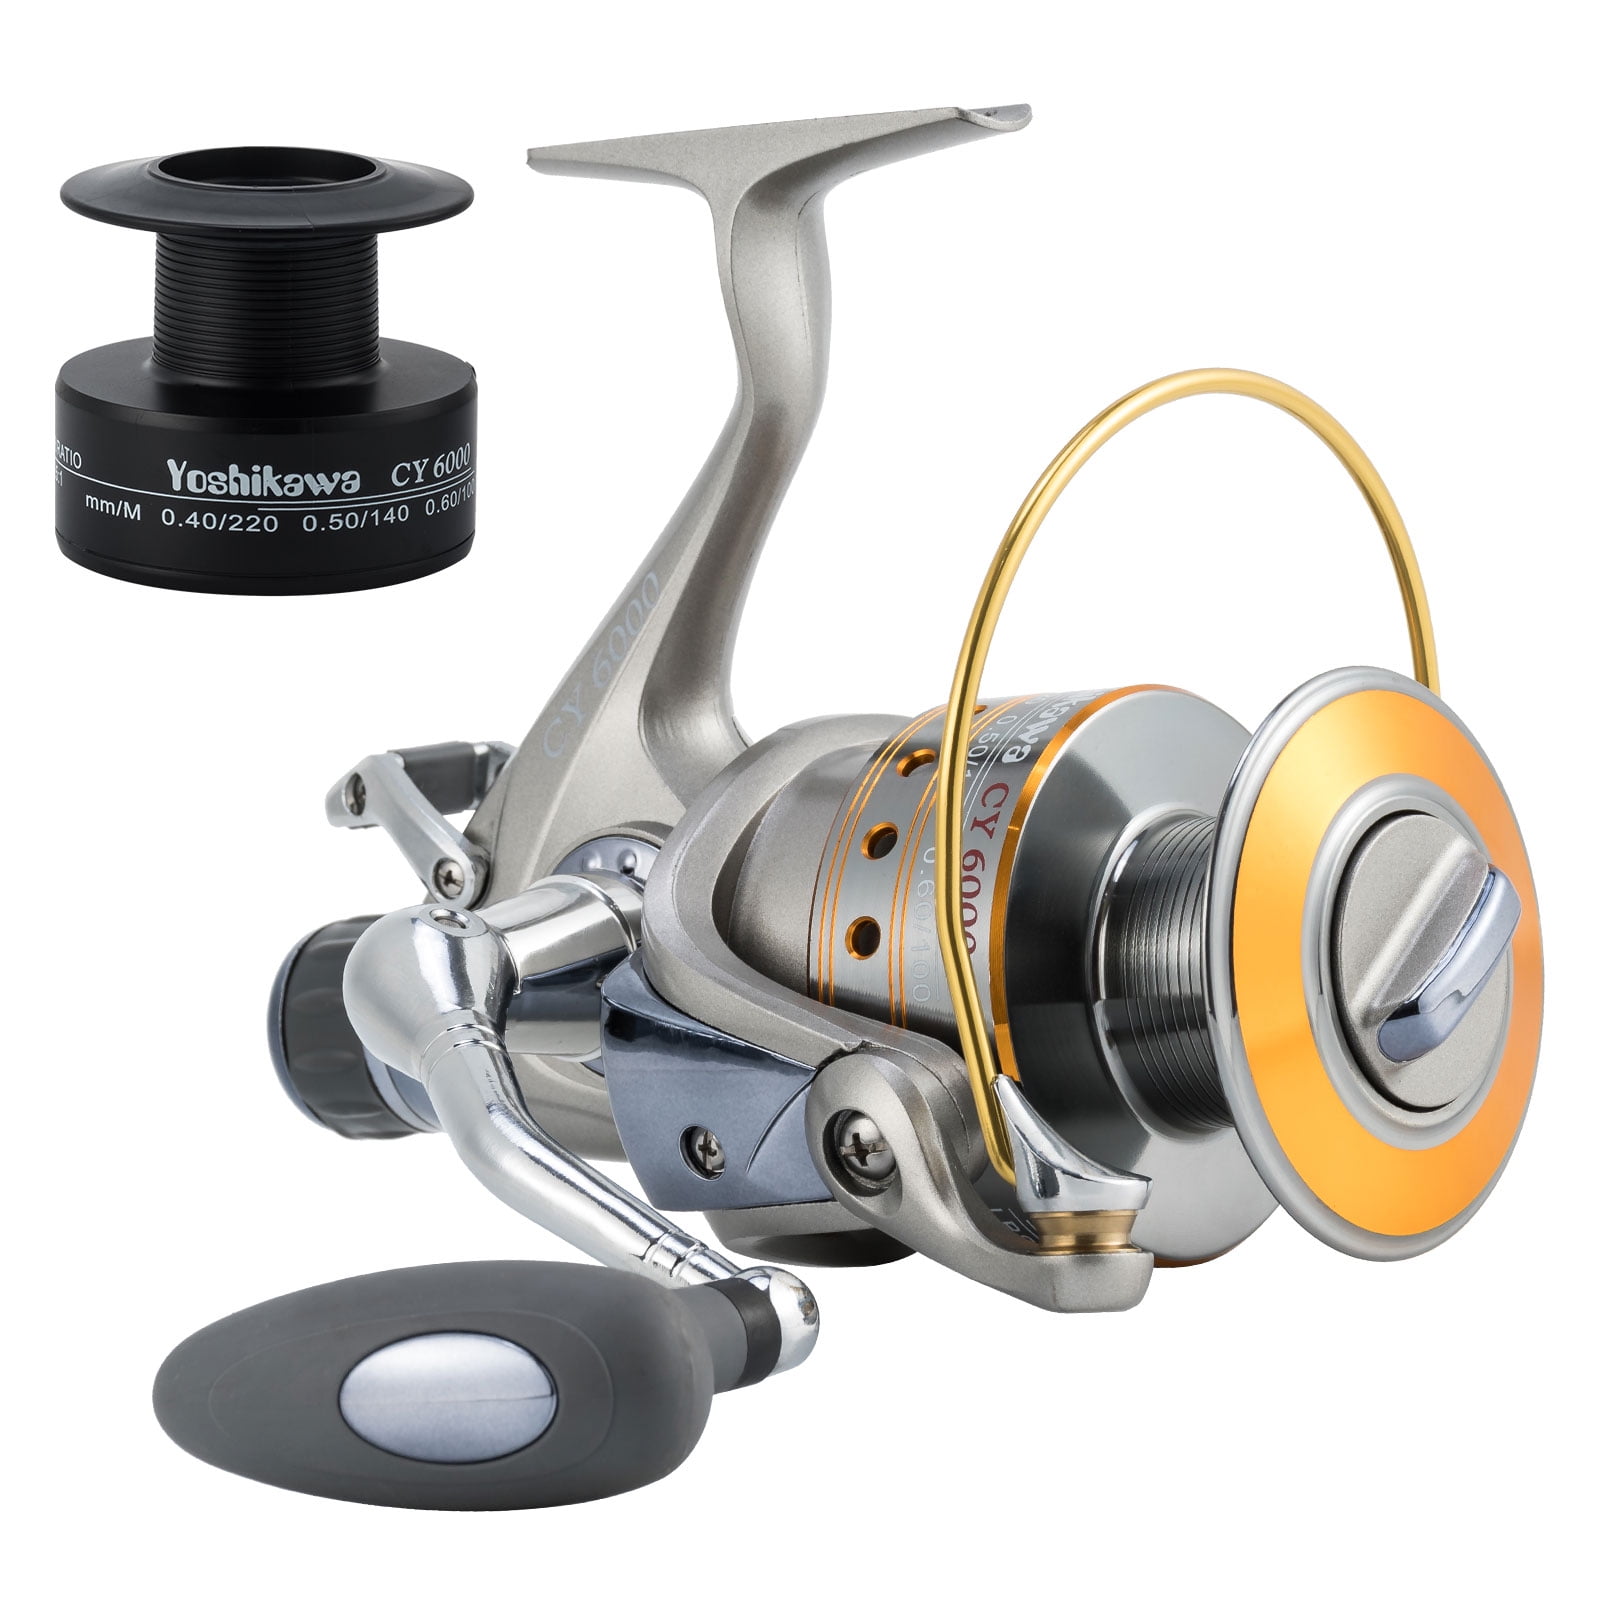 Dr.Fish Saltwater Spinning Reel 8000/9000 Surf Fishing Reel Graphite Body 9+1 Stainless Steel BB 35lb Max Drag Heavy Duty Big Game Fishing Surf Casting